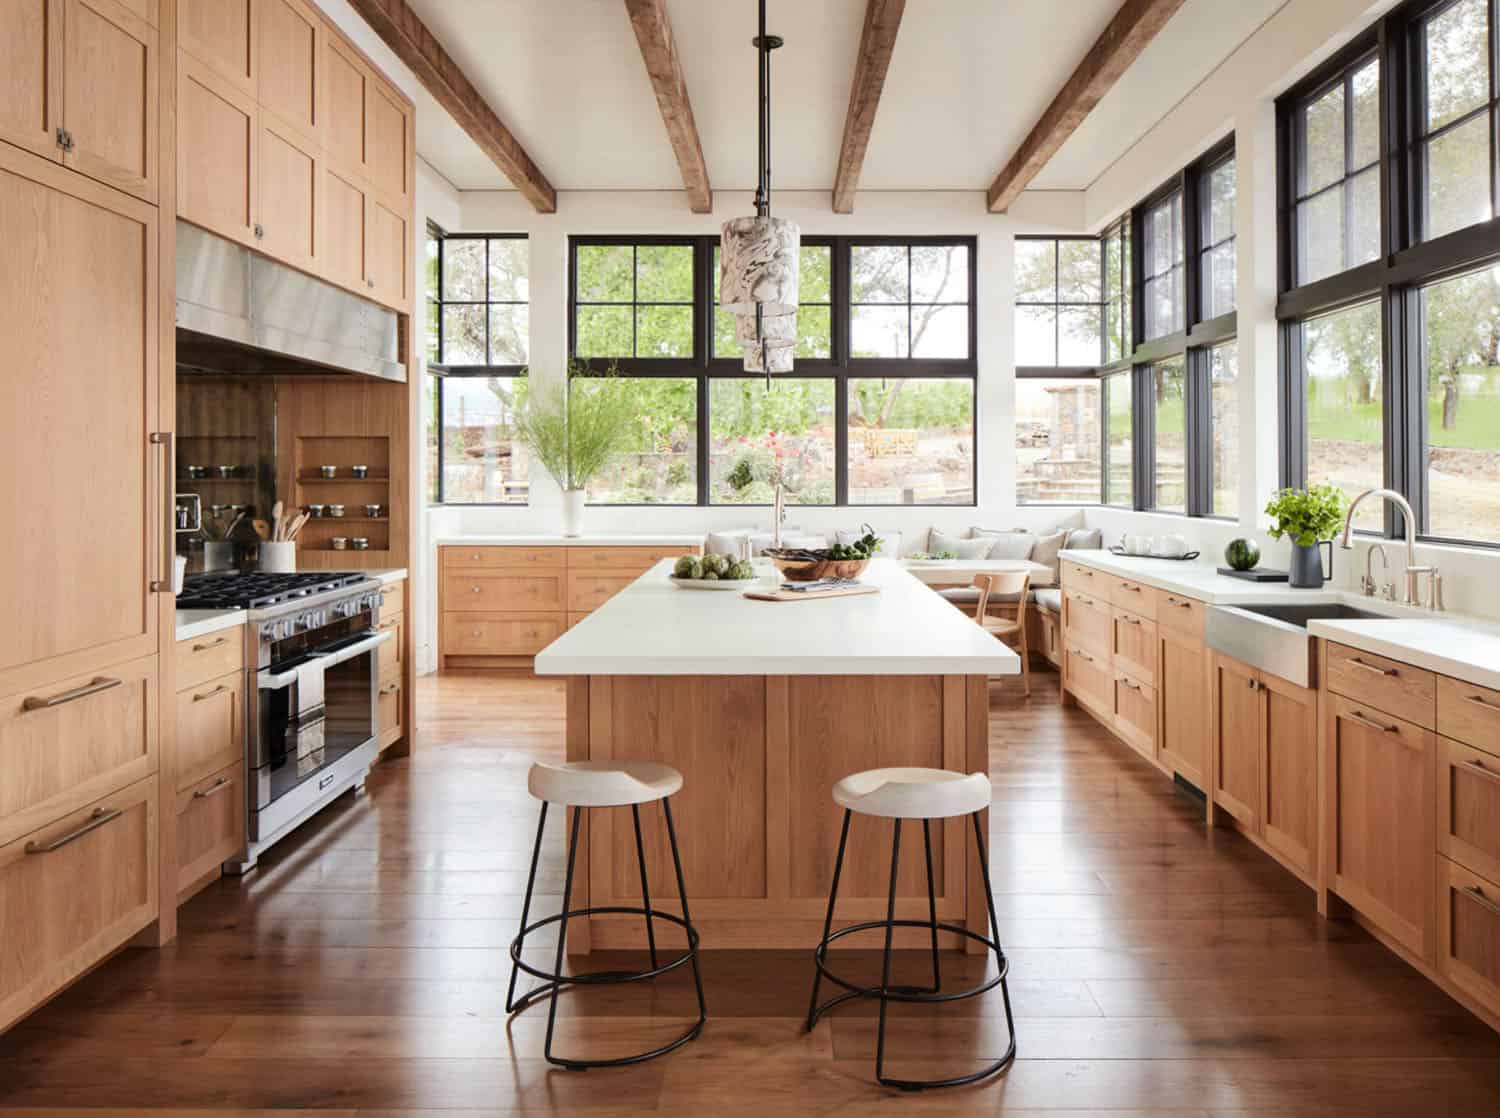 18 Jaw Dropping Ideas For A Beautiful Rustic Farmhouse Kitchen